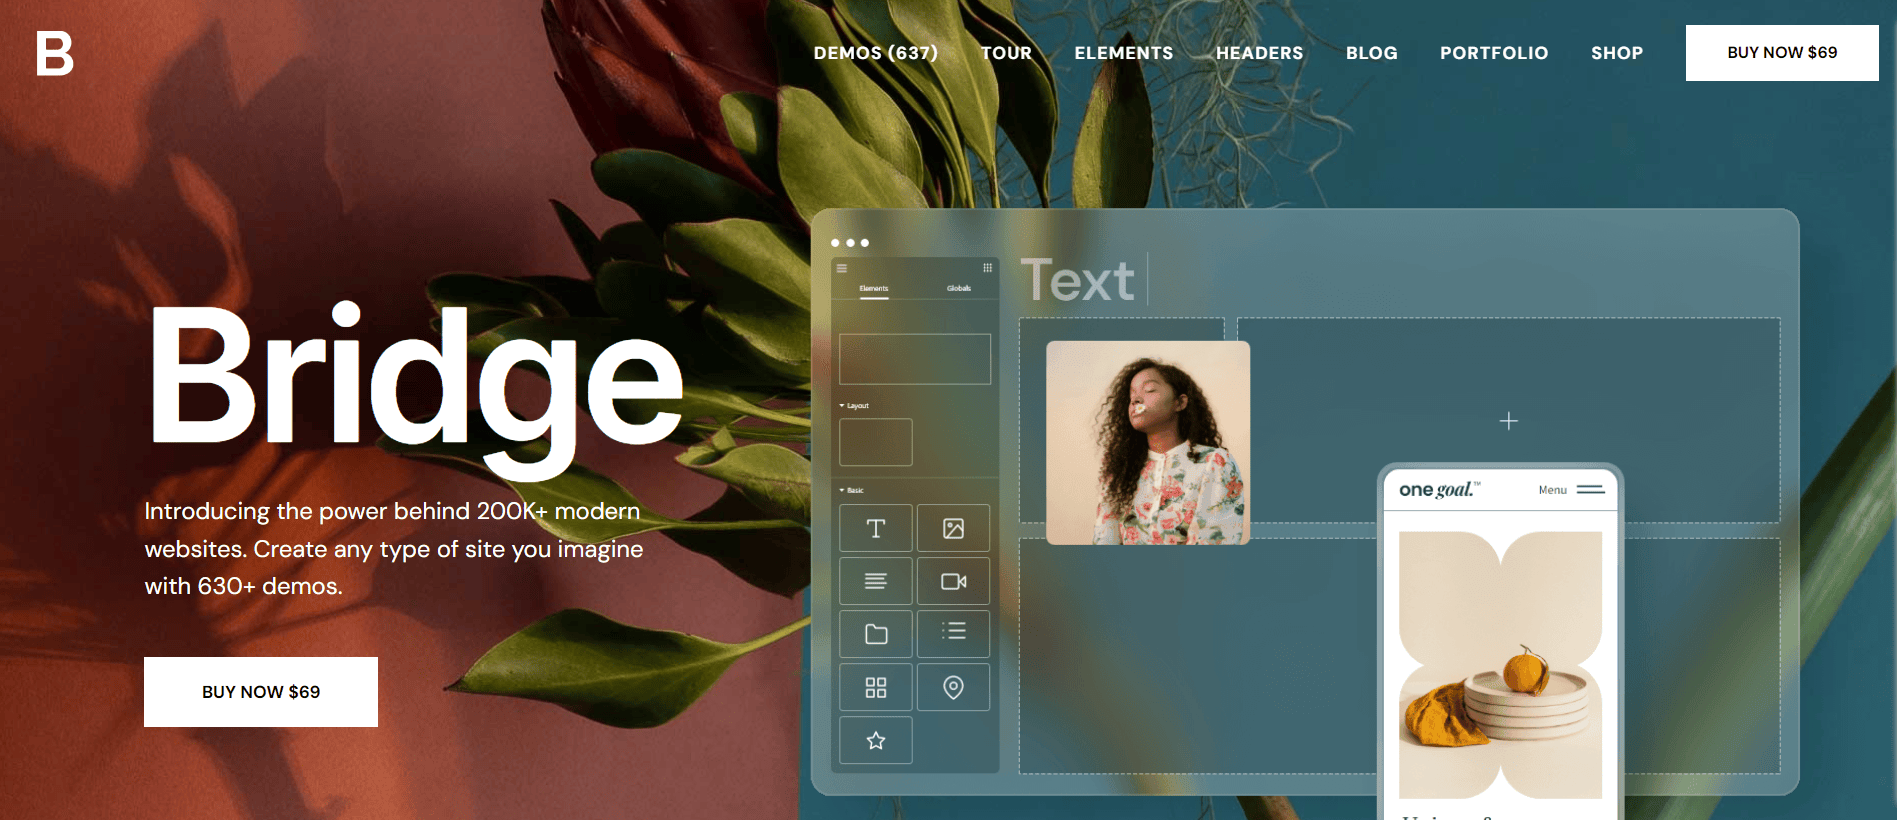 Homepage for 'Bridge' WordPress theme with a tagline about the power behind 200K+ modern websites, featuring a tropical plant background and website layout demo.